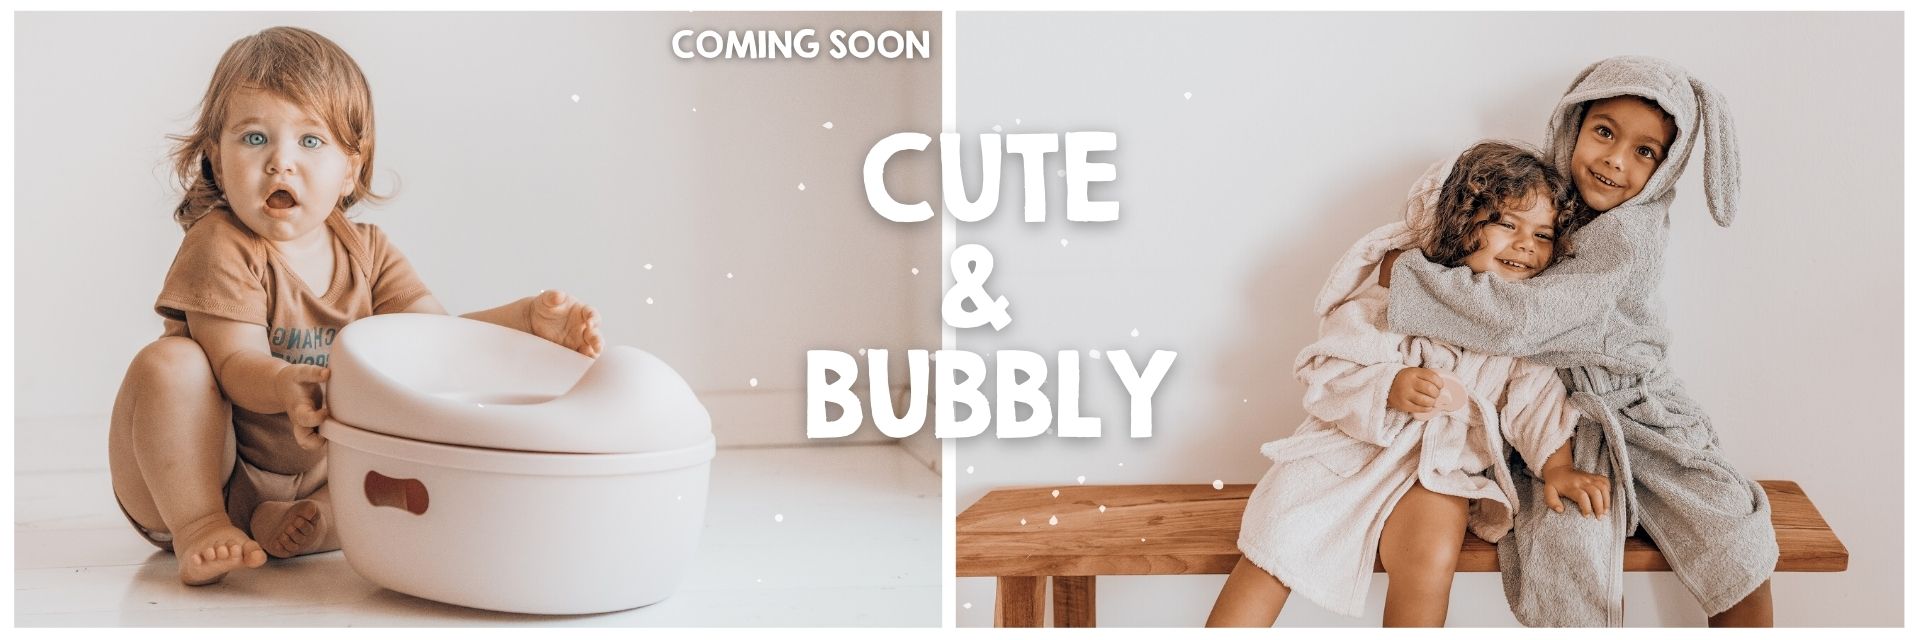 CUTE AND BUBBLY